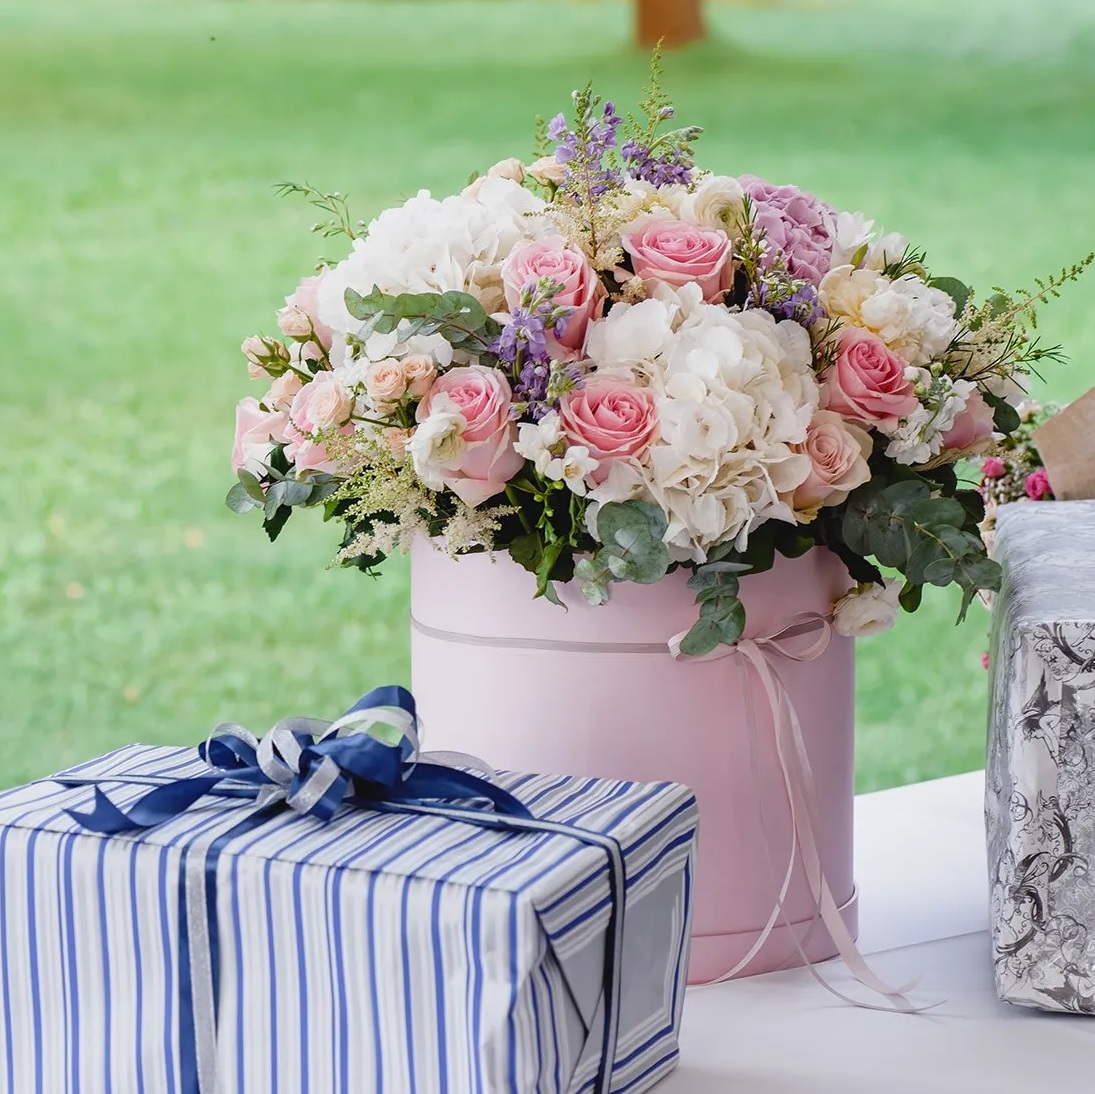 What to give as a wedding gift